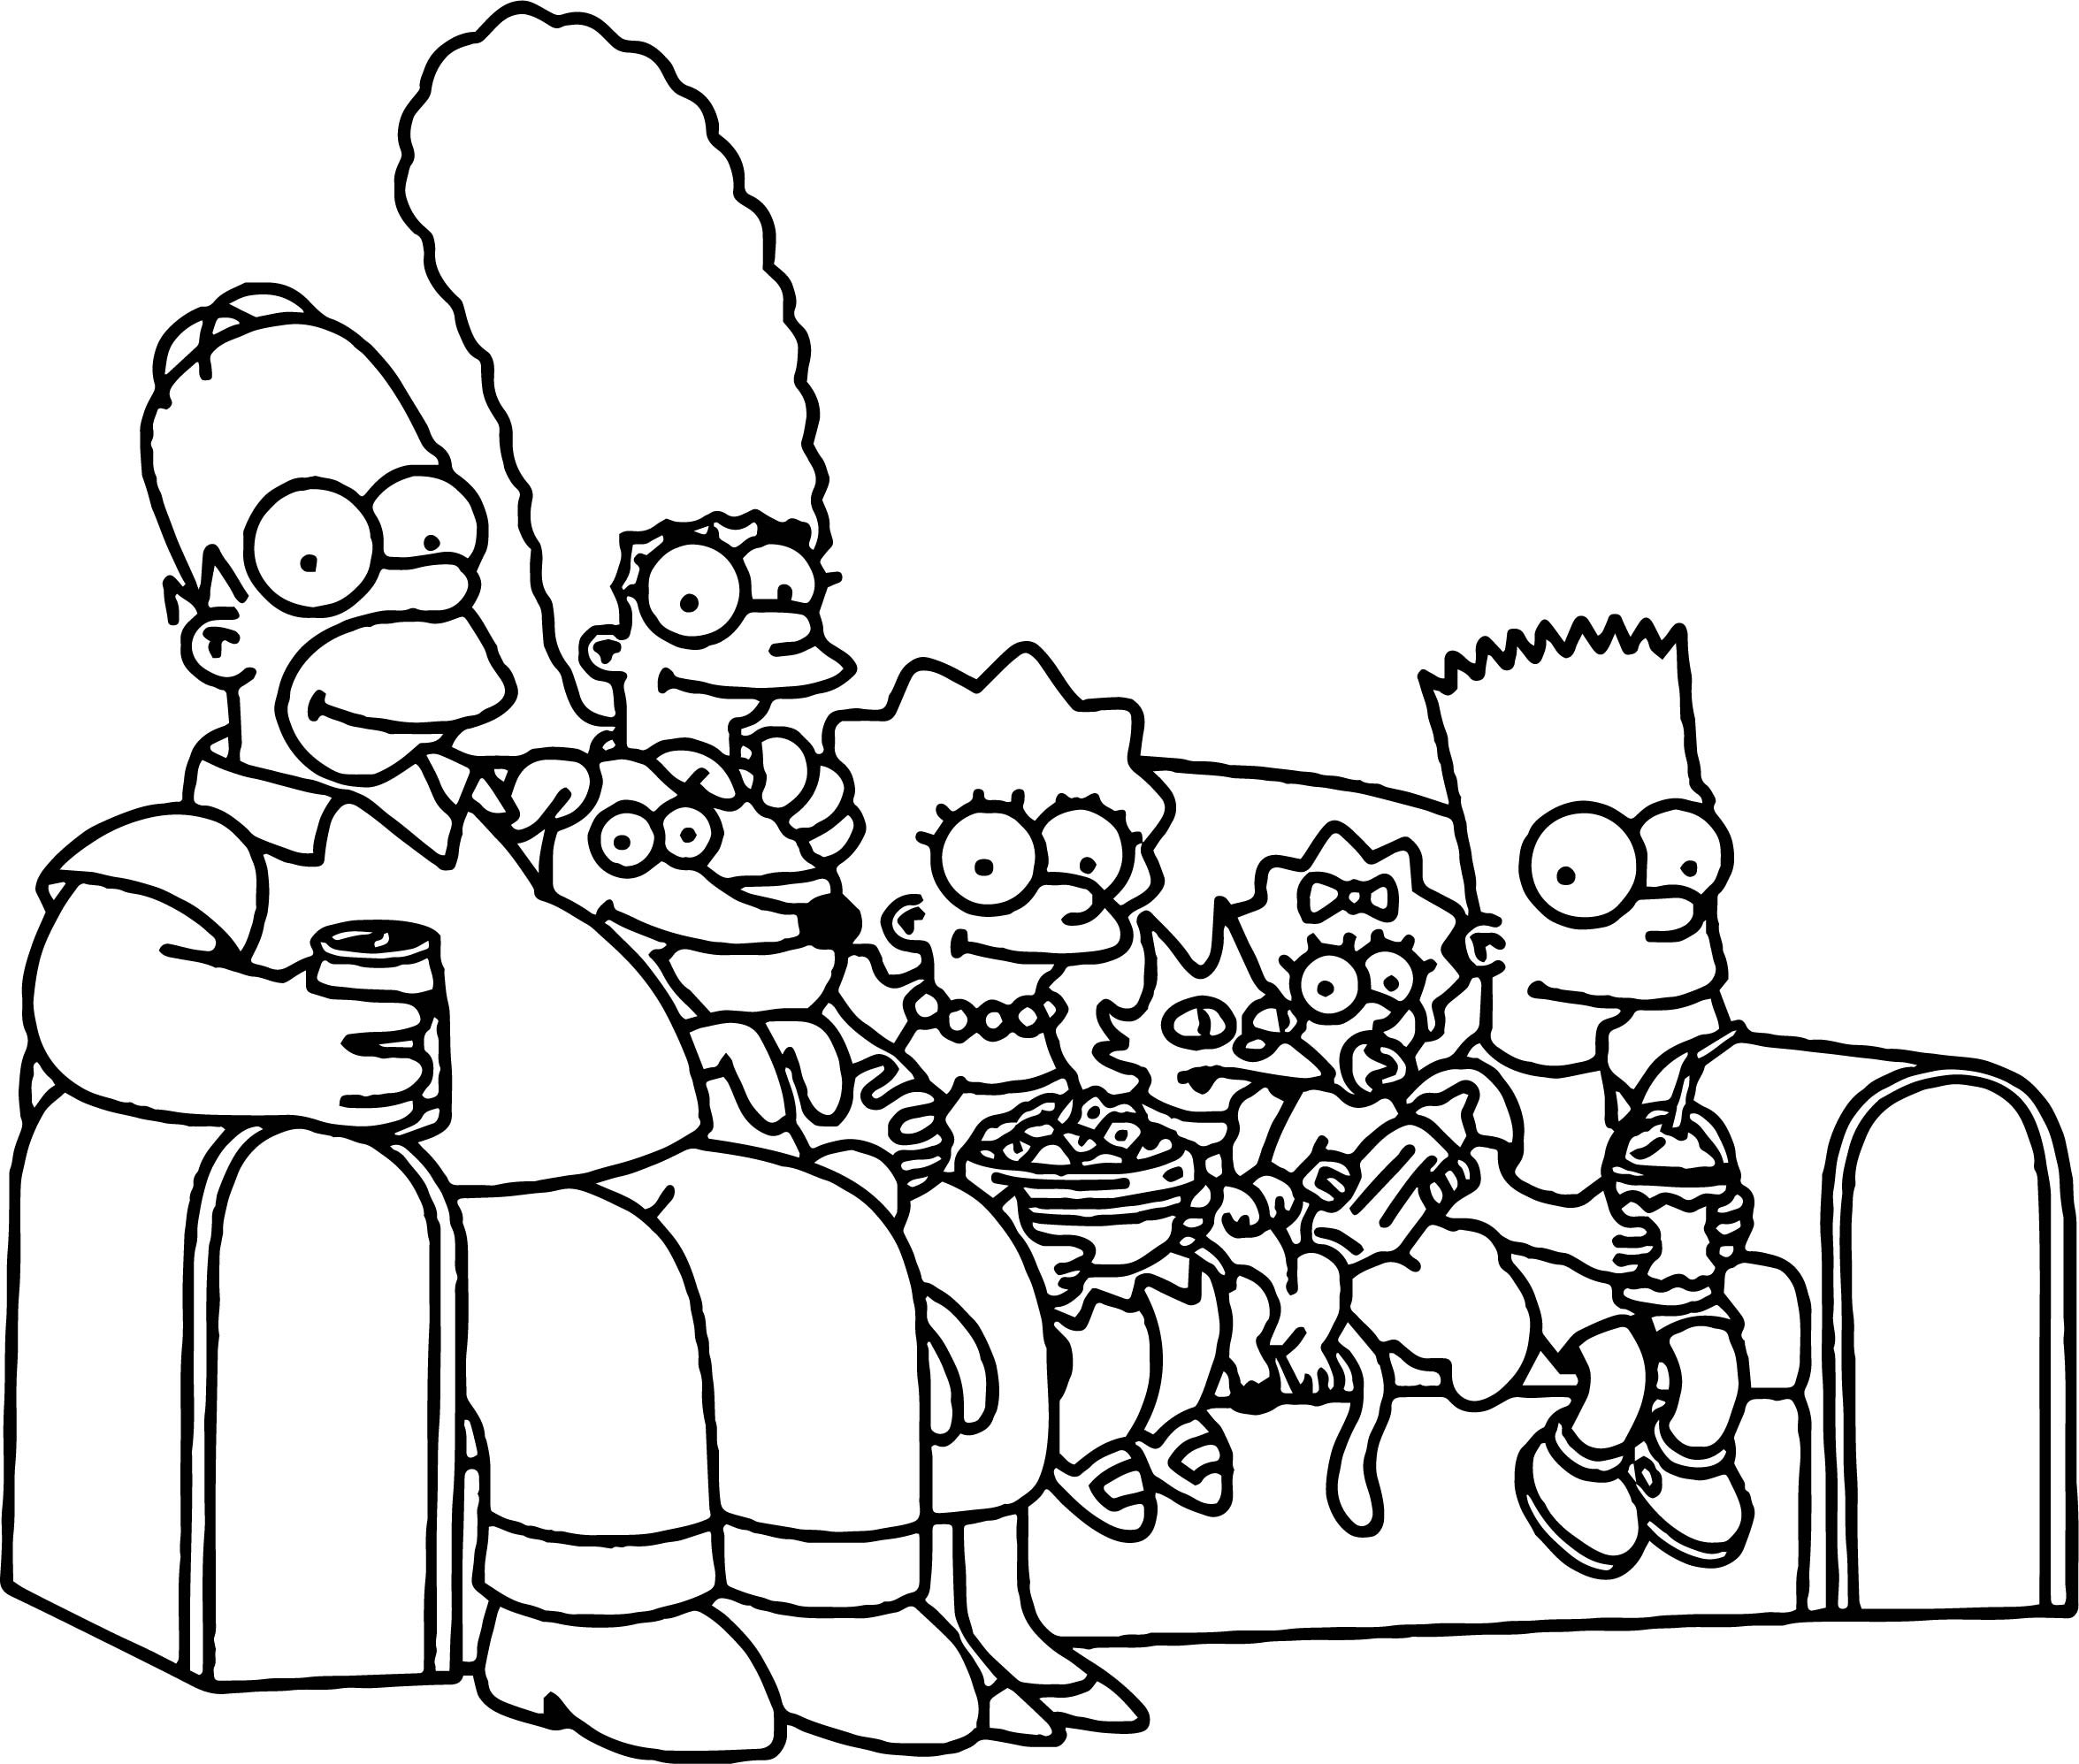 137 Simple Free Coloring Pages Simpsons with Animal character